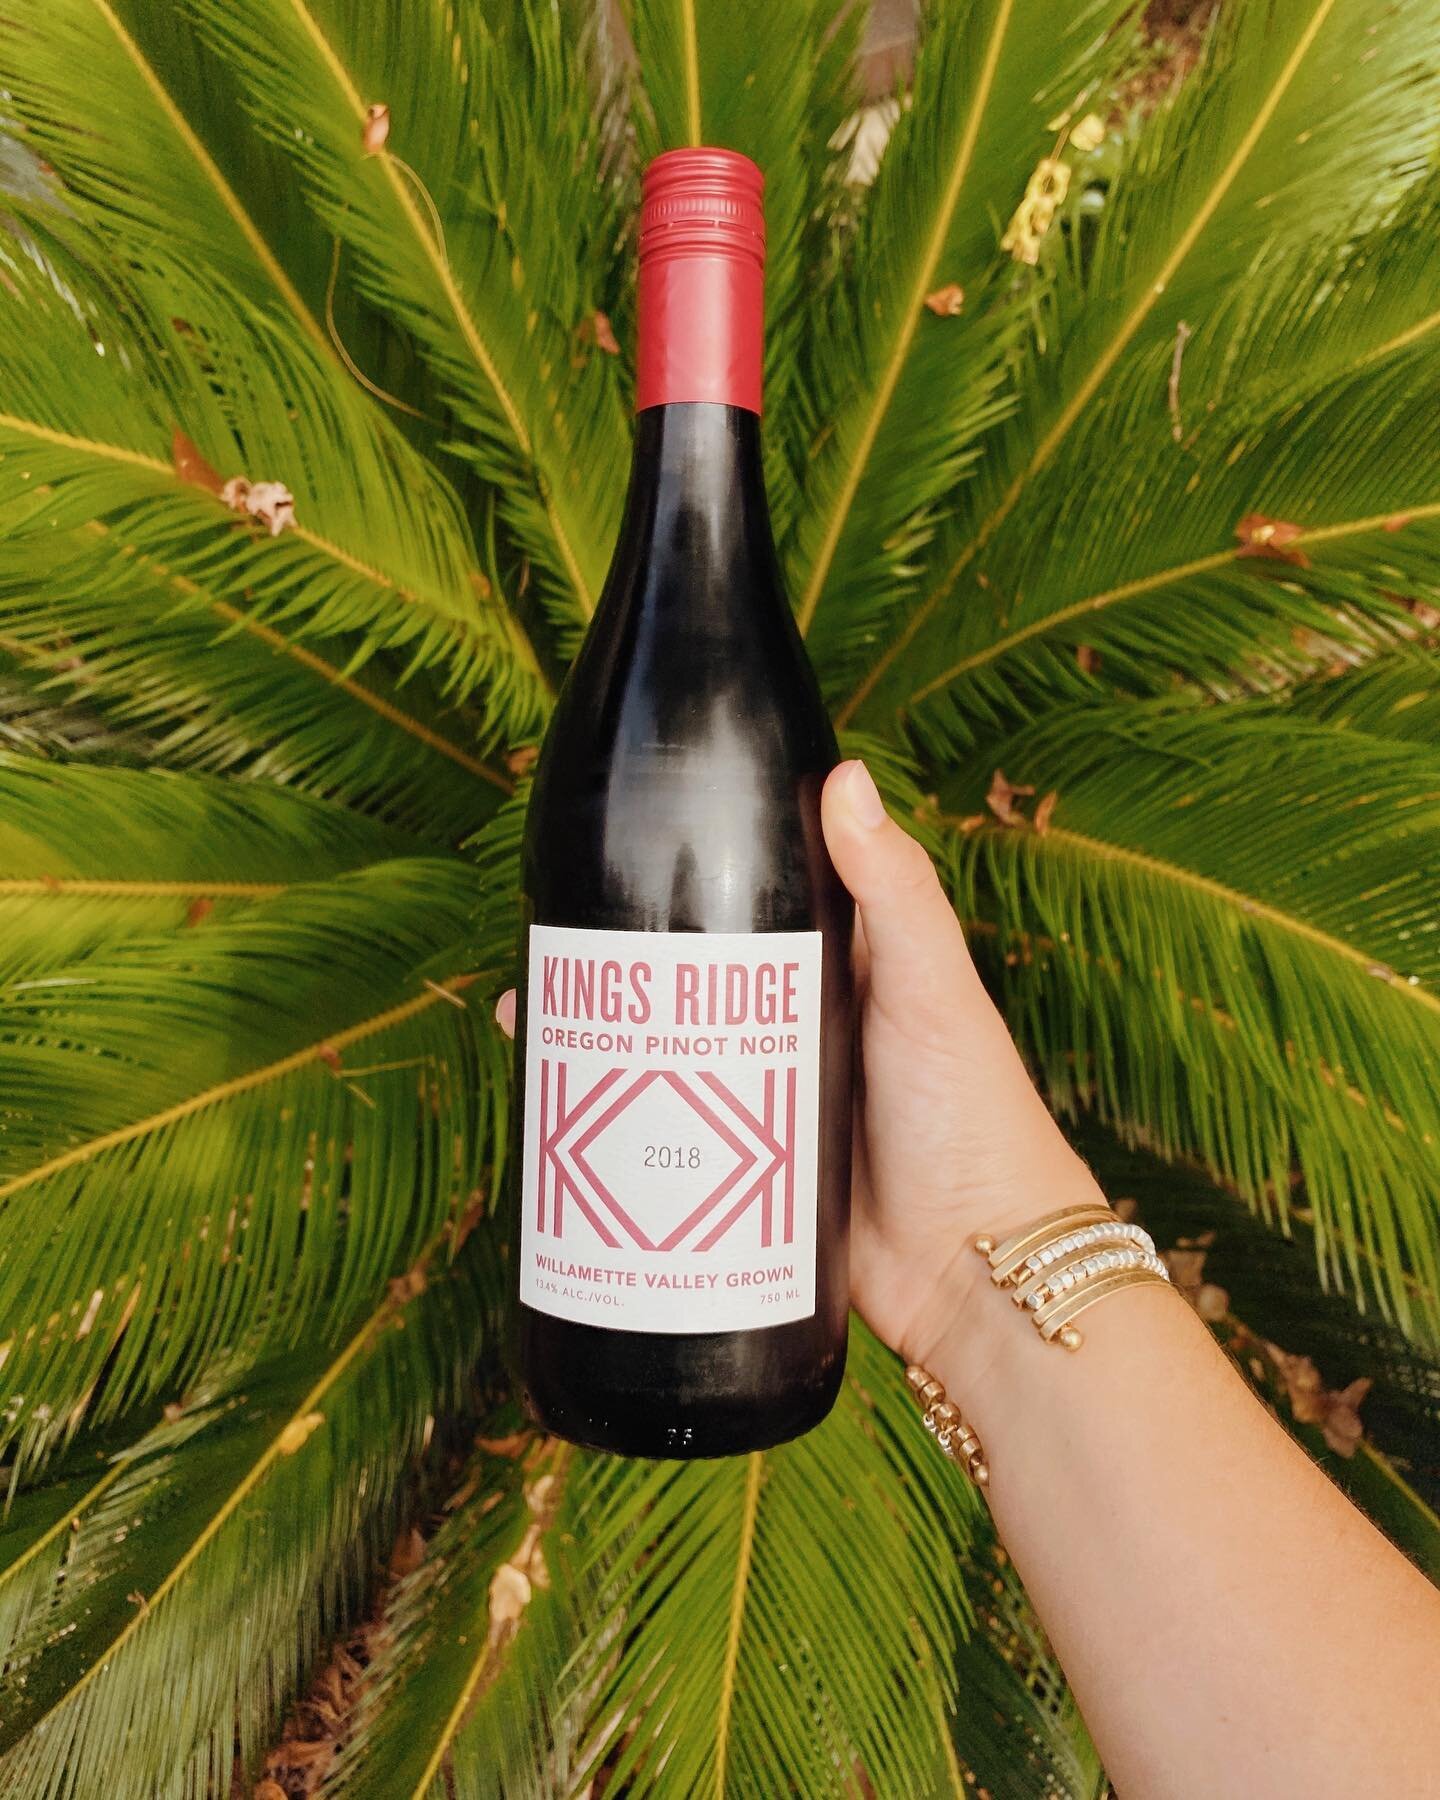 Happy #winewednesday ✨ This weeks feature is our house pinot, King&rsquo;s Ridge! ⁣
.⁣⁣
.⁣⁣⁣
⁣⁣
&ldquo;A combination of rich red fruit flavors with freshness and vibrancy unique to Pinot Noir grapes grown in our beloved Willamette Valley, this wine t